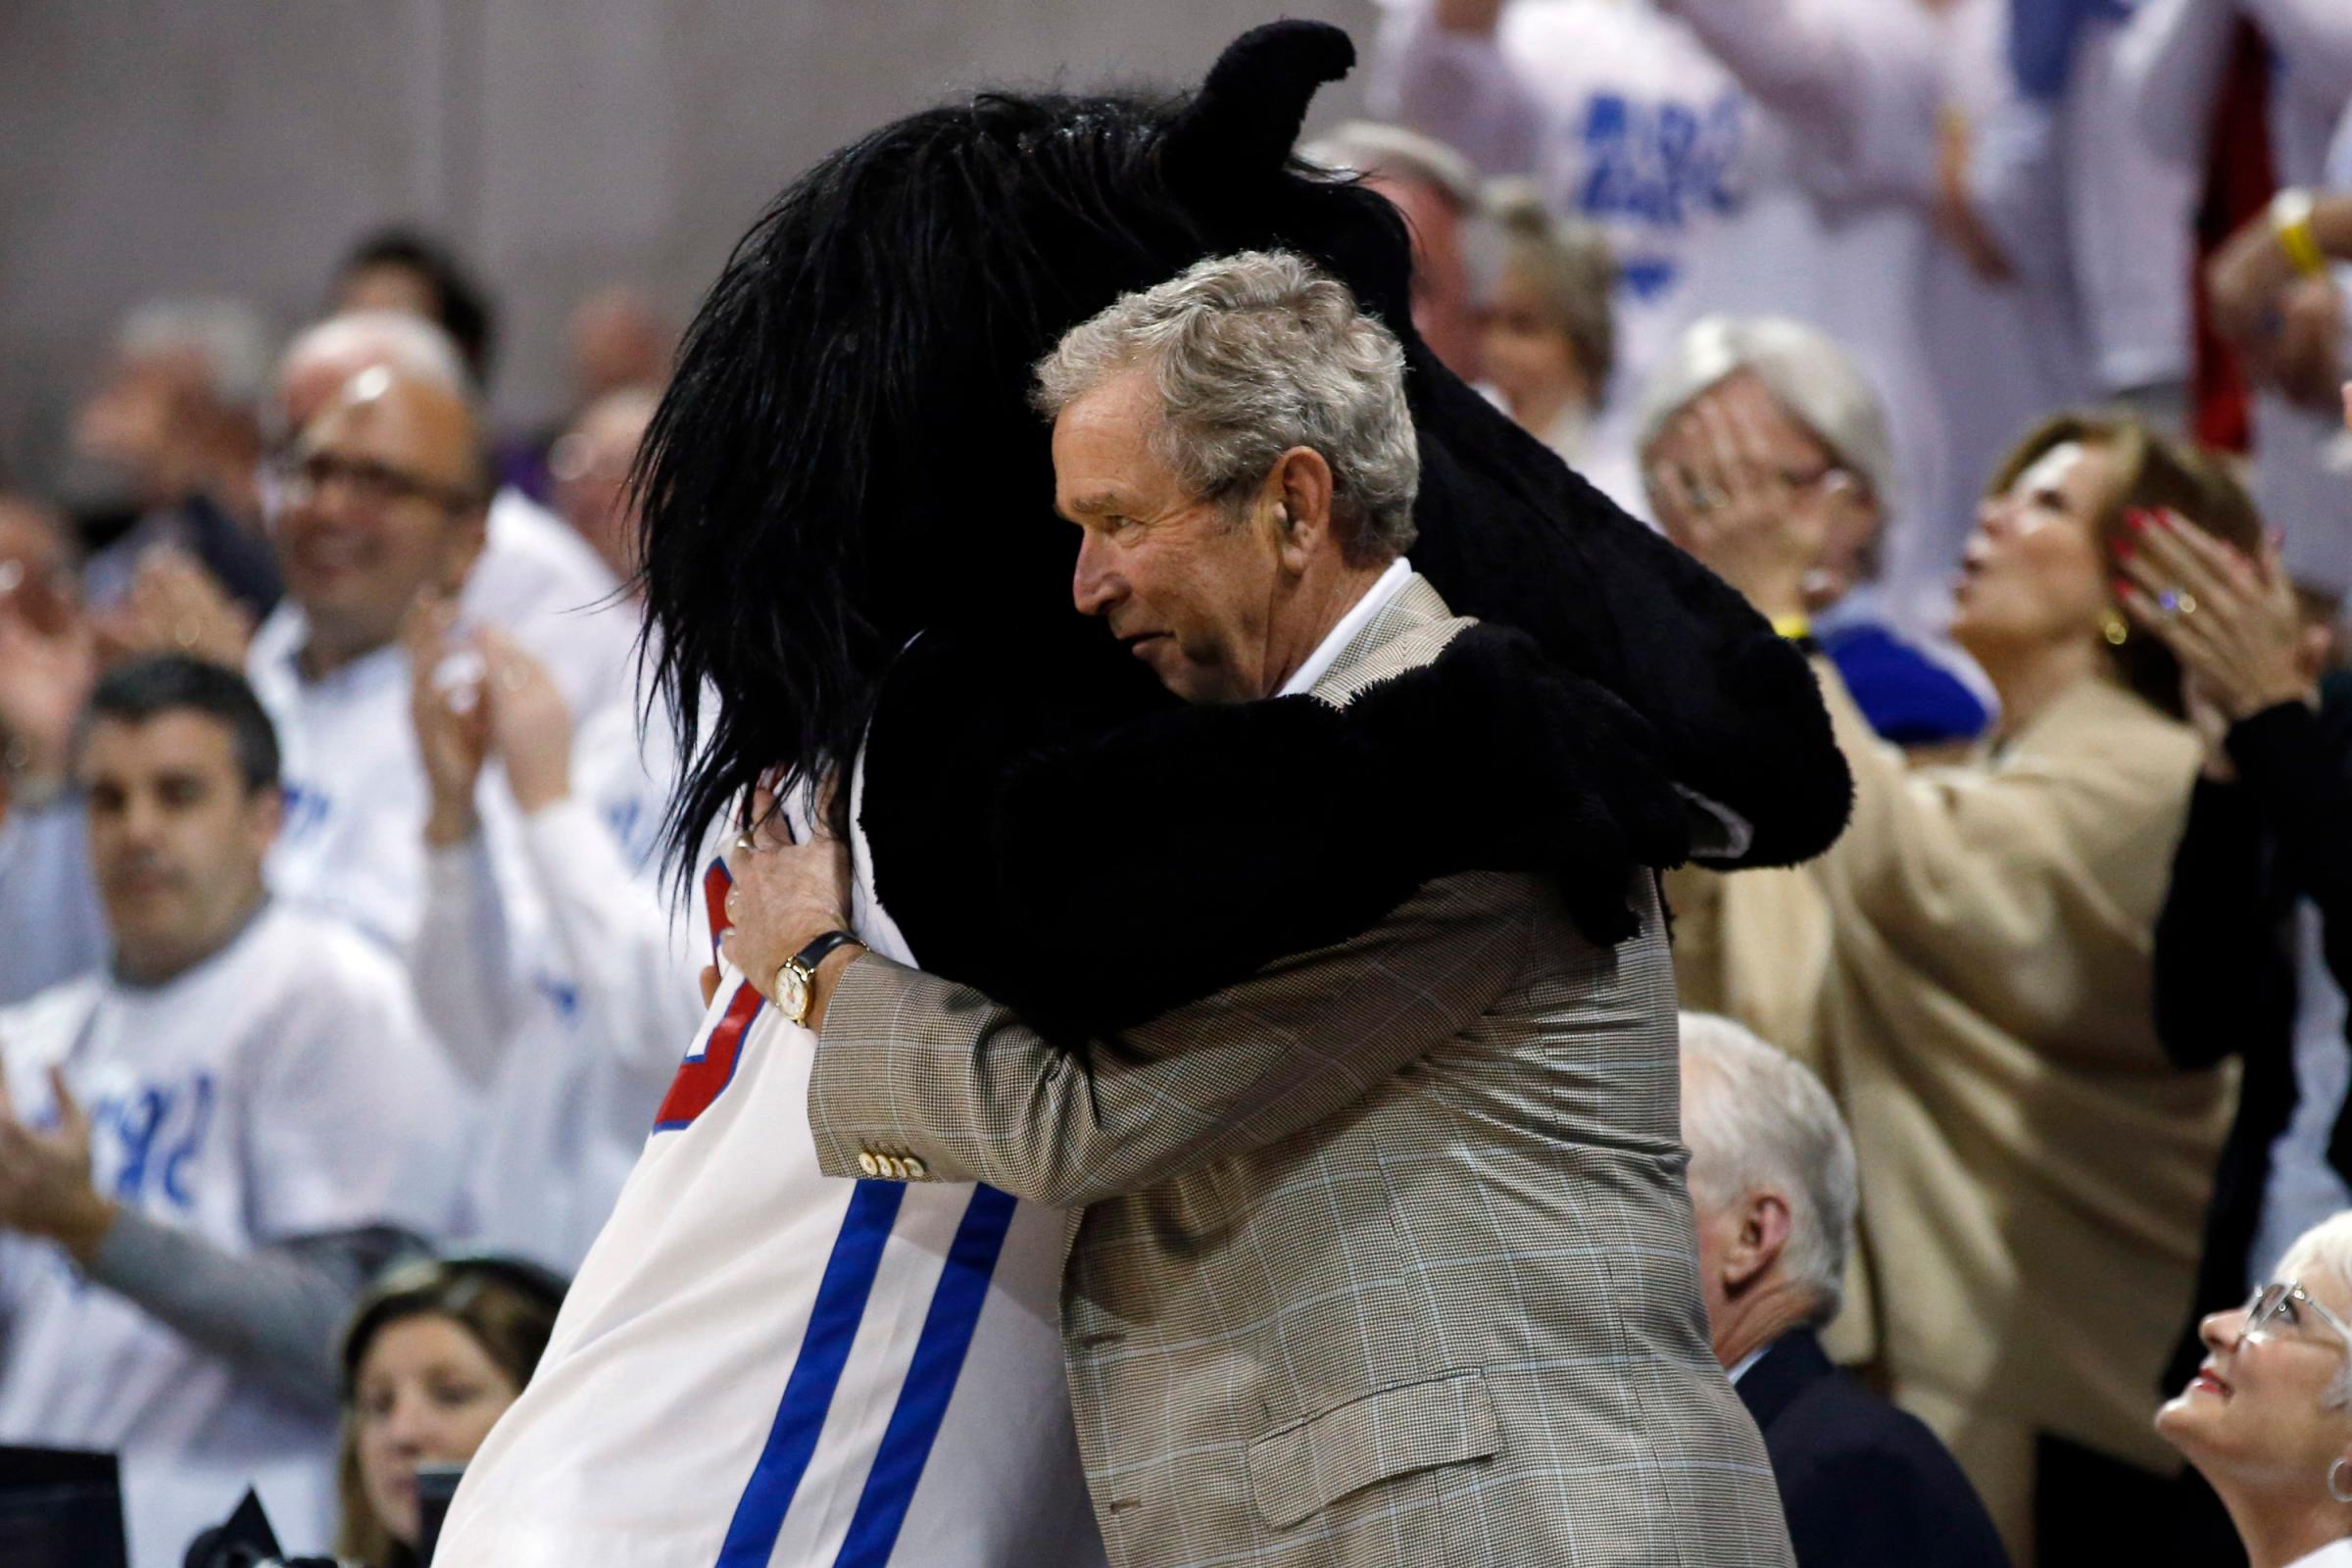 Former President George W. Bush gets a hug from SMU mascot Peruna during a break in the first of an NCAA college basketball game between SMU and Louisville on March 5, 2014, in Dallas.